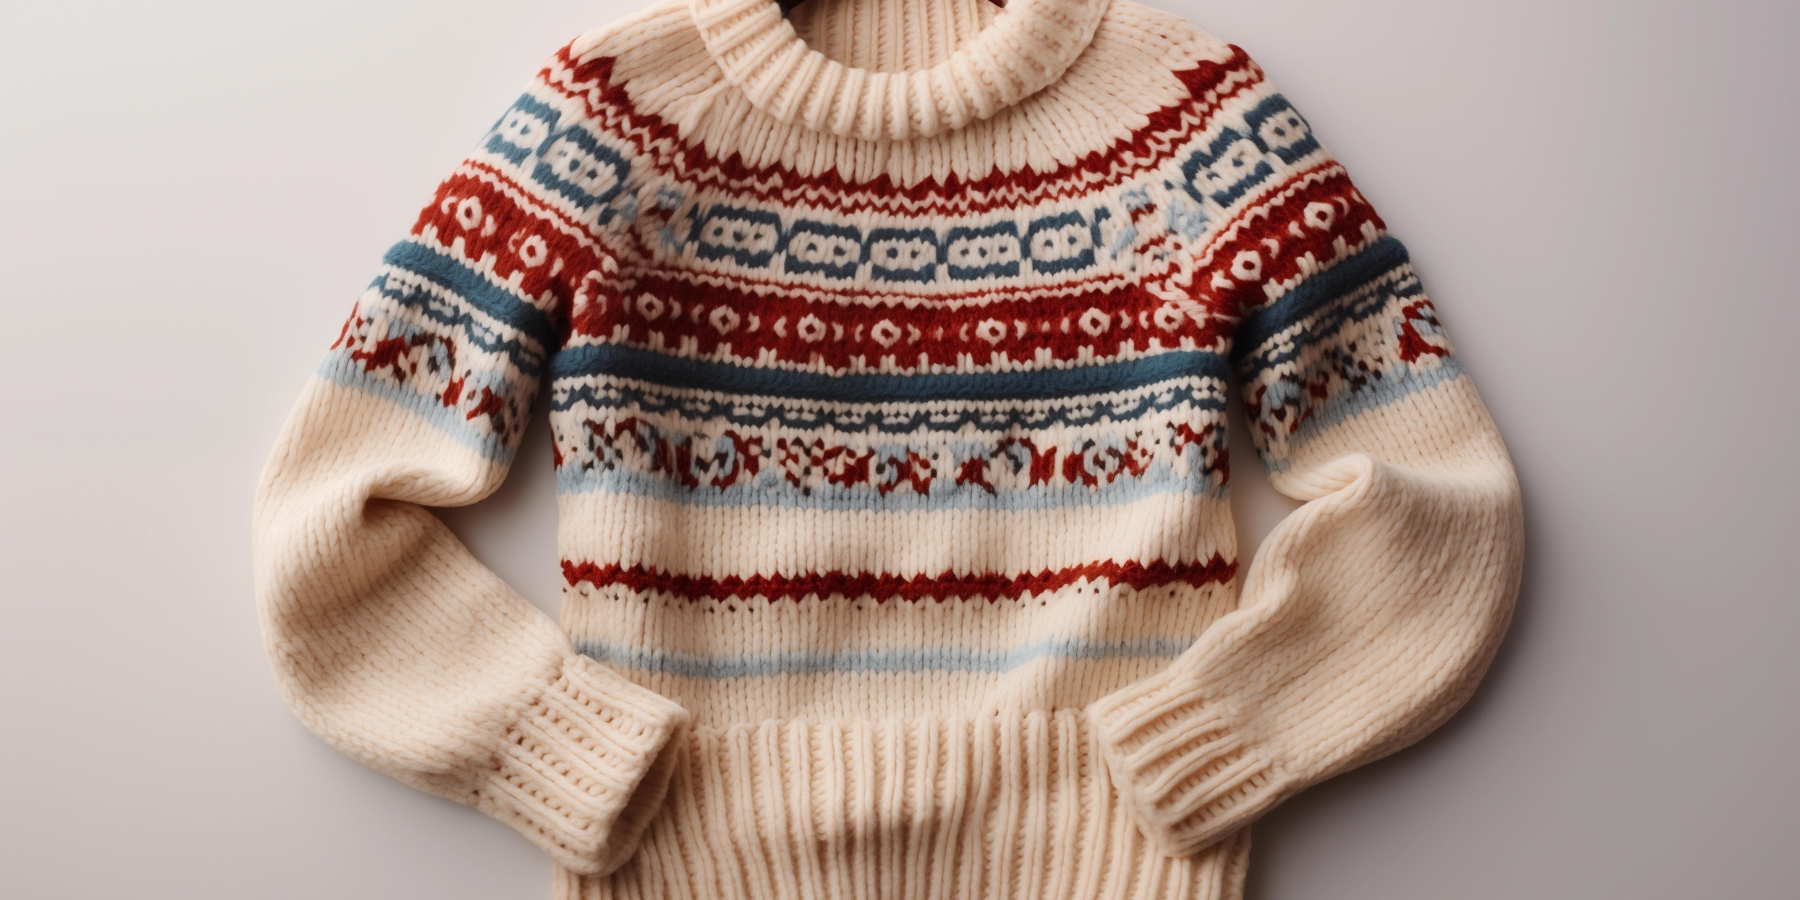 Choose your favourite Christmas sweater style